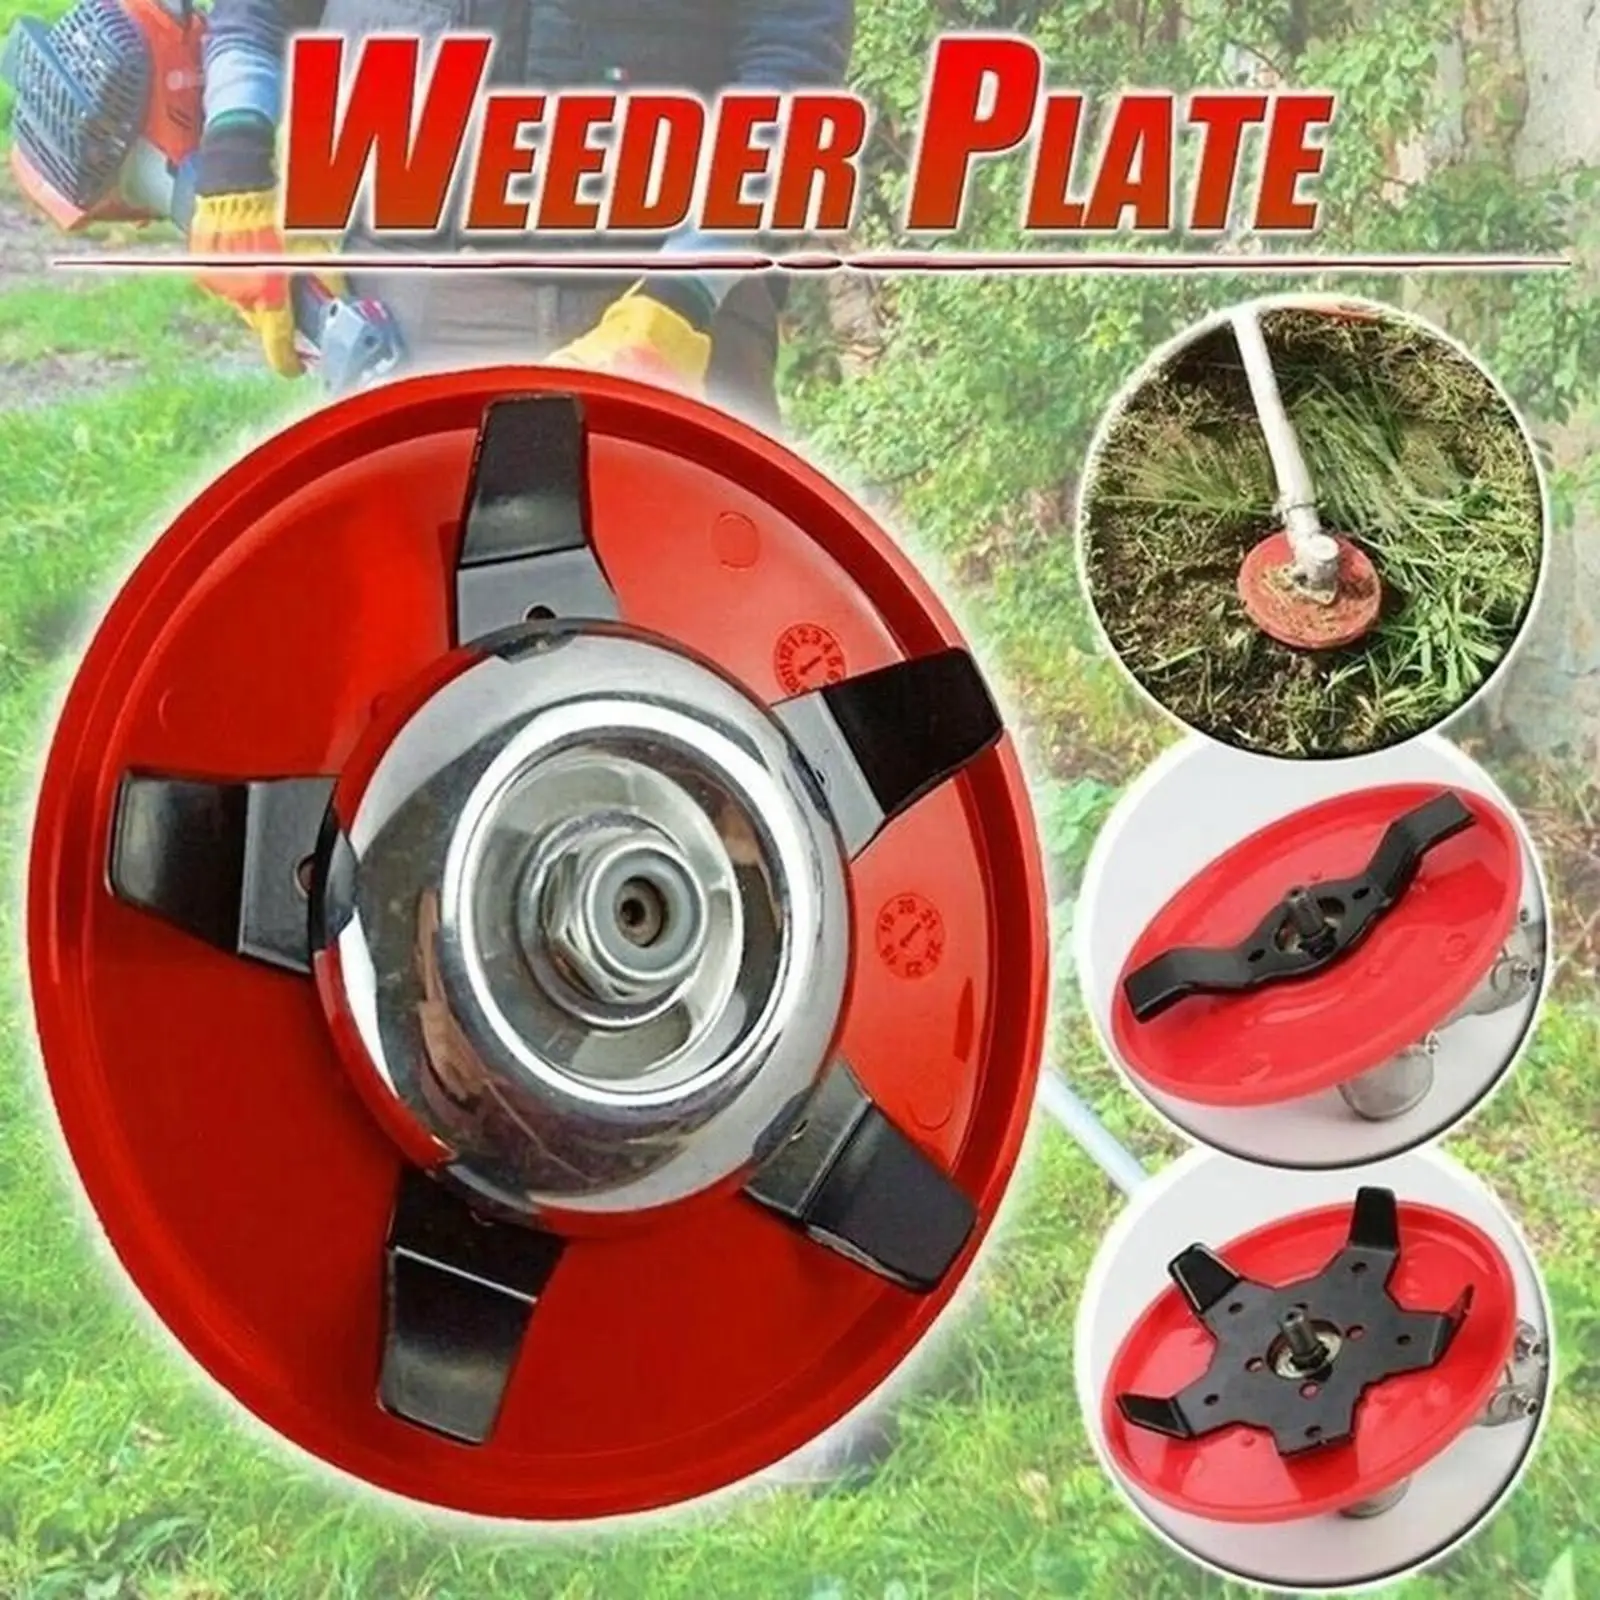 mower Accessory Replacement Weeds Mower Parts Tools Brush Cutter Head for grass blade Brush cutter Garden Lawn